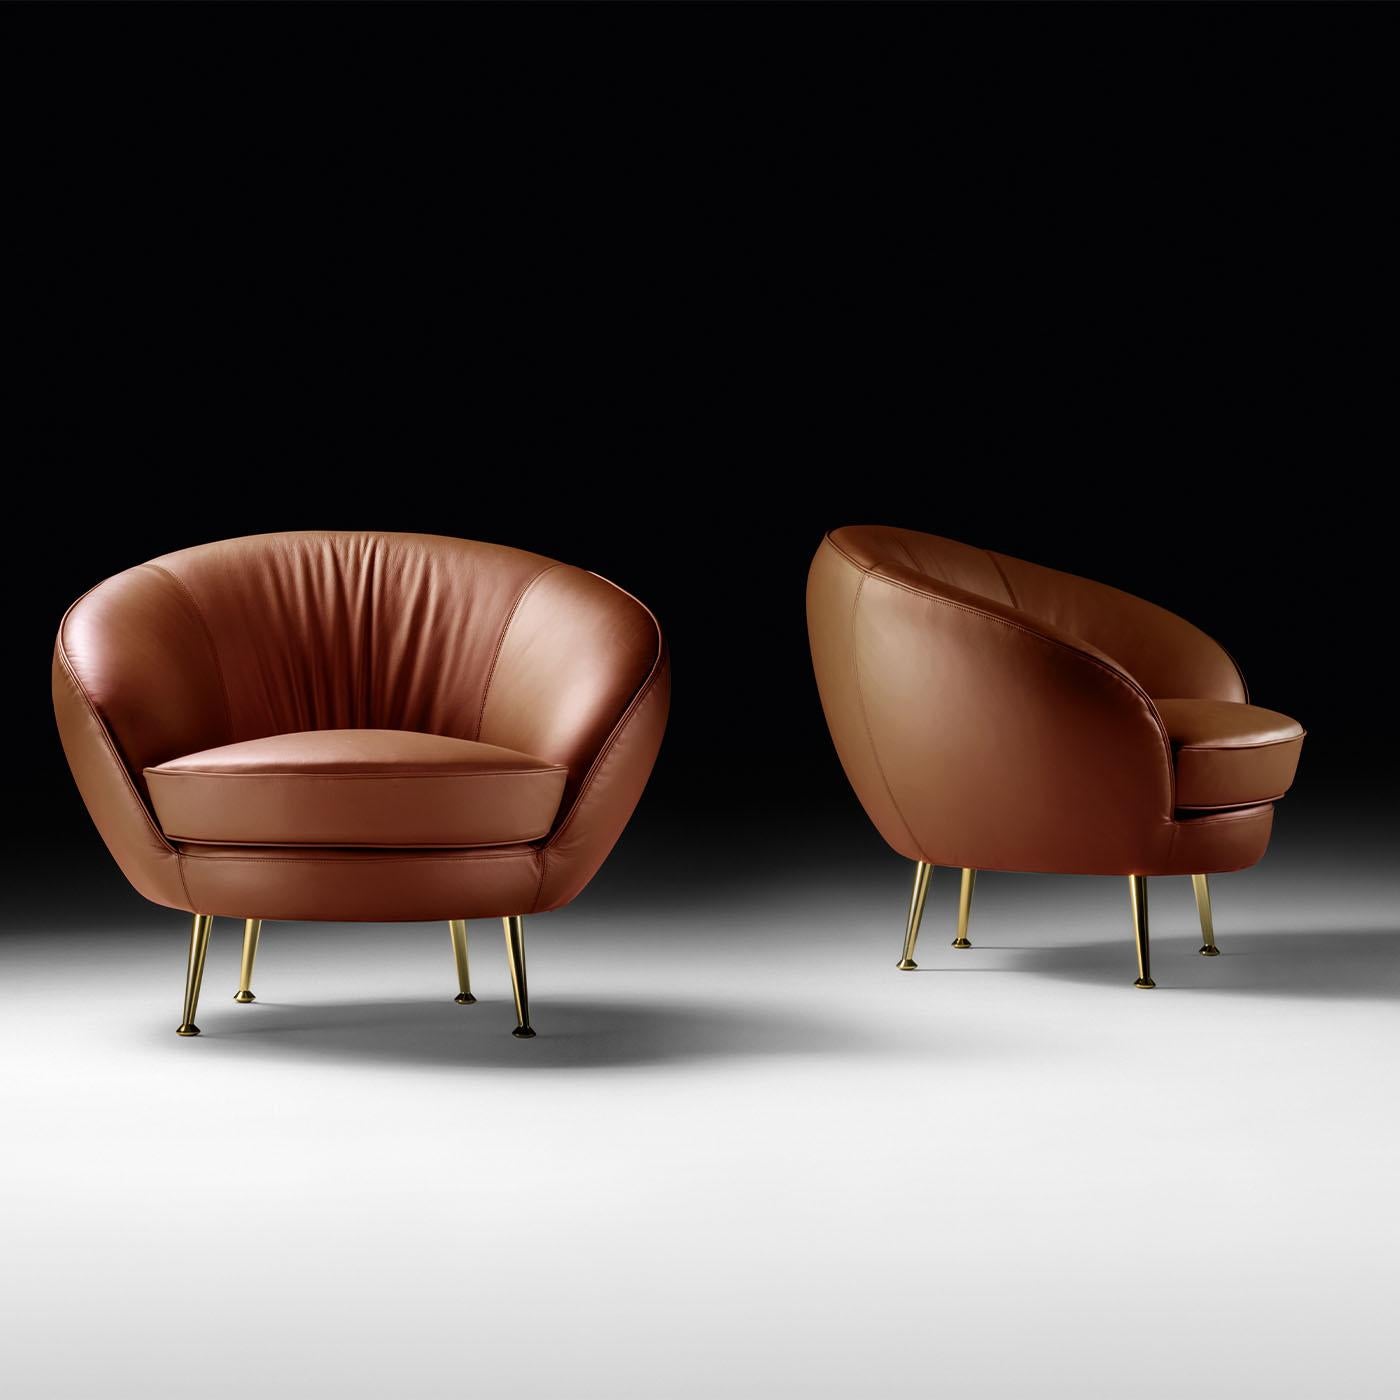 Stiletto feet in a refined metallic finish sustain the welcoming seat distinguishing this armchair. Prized brown leather fully envelops the seating unit, where the plush seat cushion is embraced by a flared-cut shell whose sides harmoniously slope